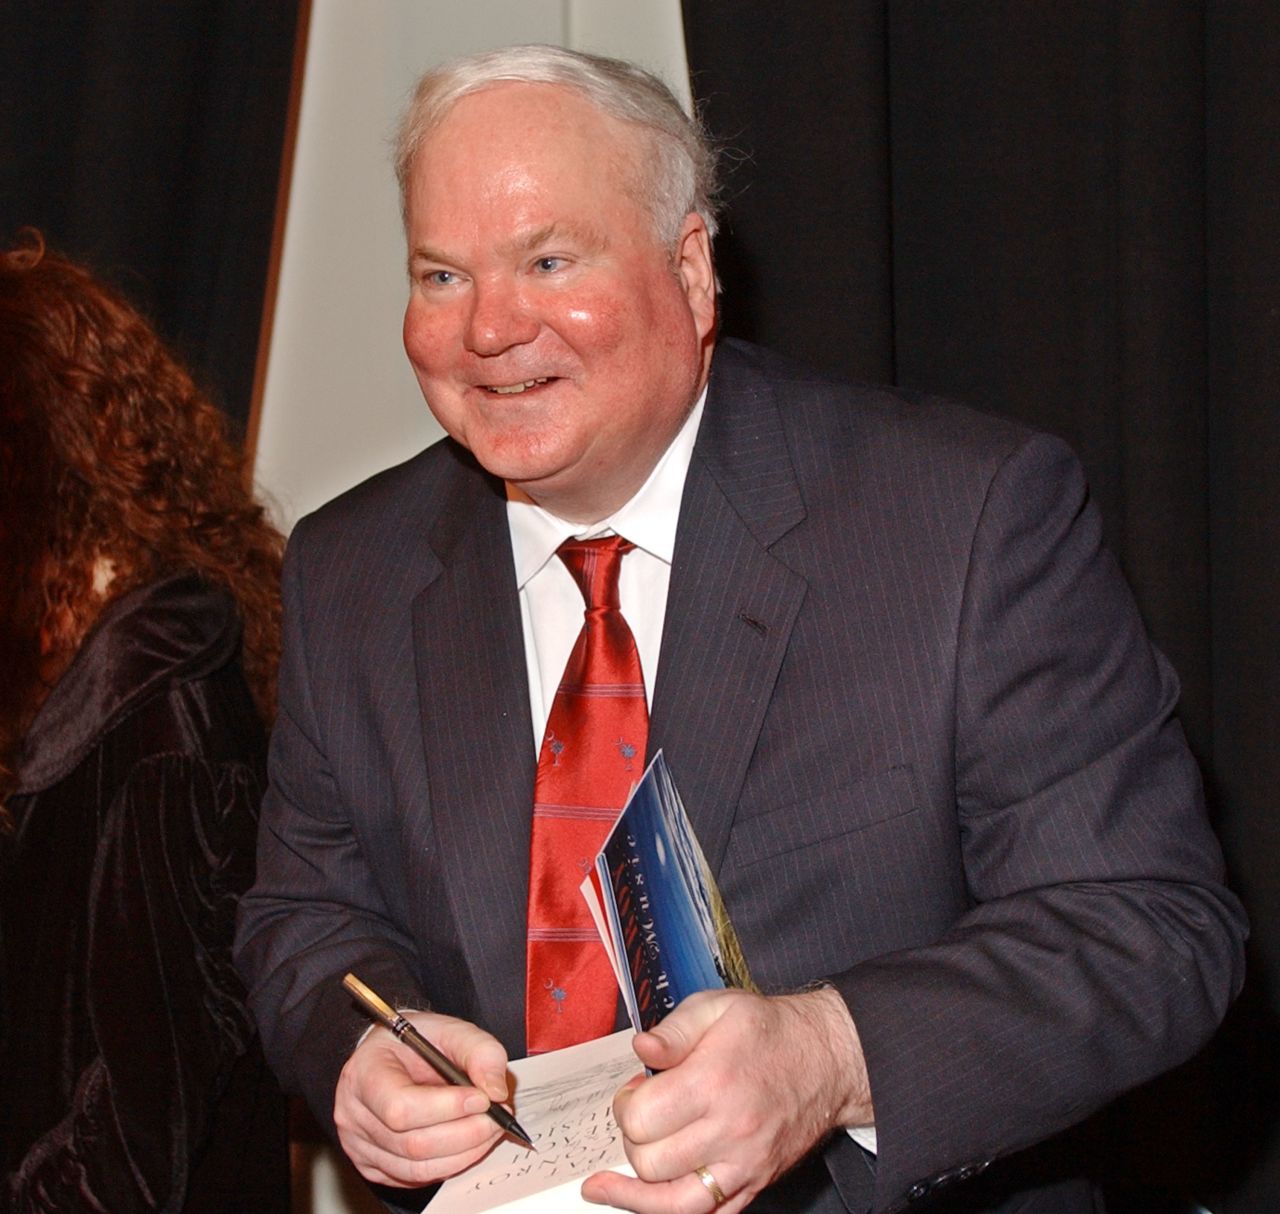 <a href="http://www.cnn.com/2016/03/05/entertainment/author-pat-conroy-dead/index.html">Pat Conroy, </a>who used his troubled family history as grist for a series of novels, including "The Prince of Tides" and "The Great Santini," died March 4 at age 70.